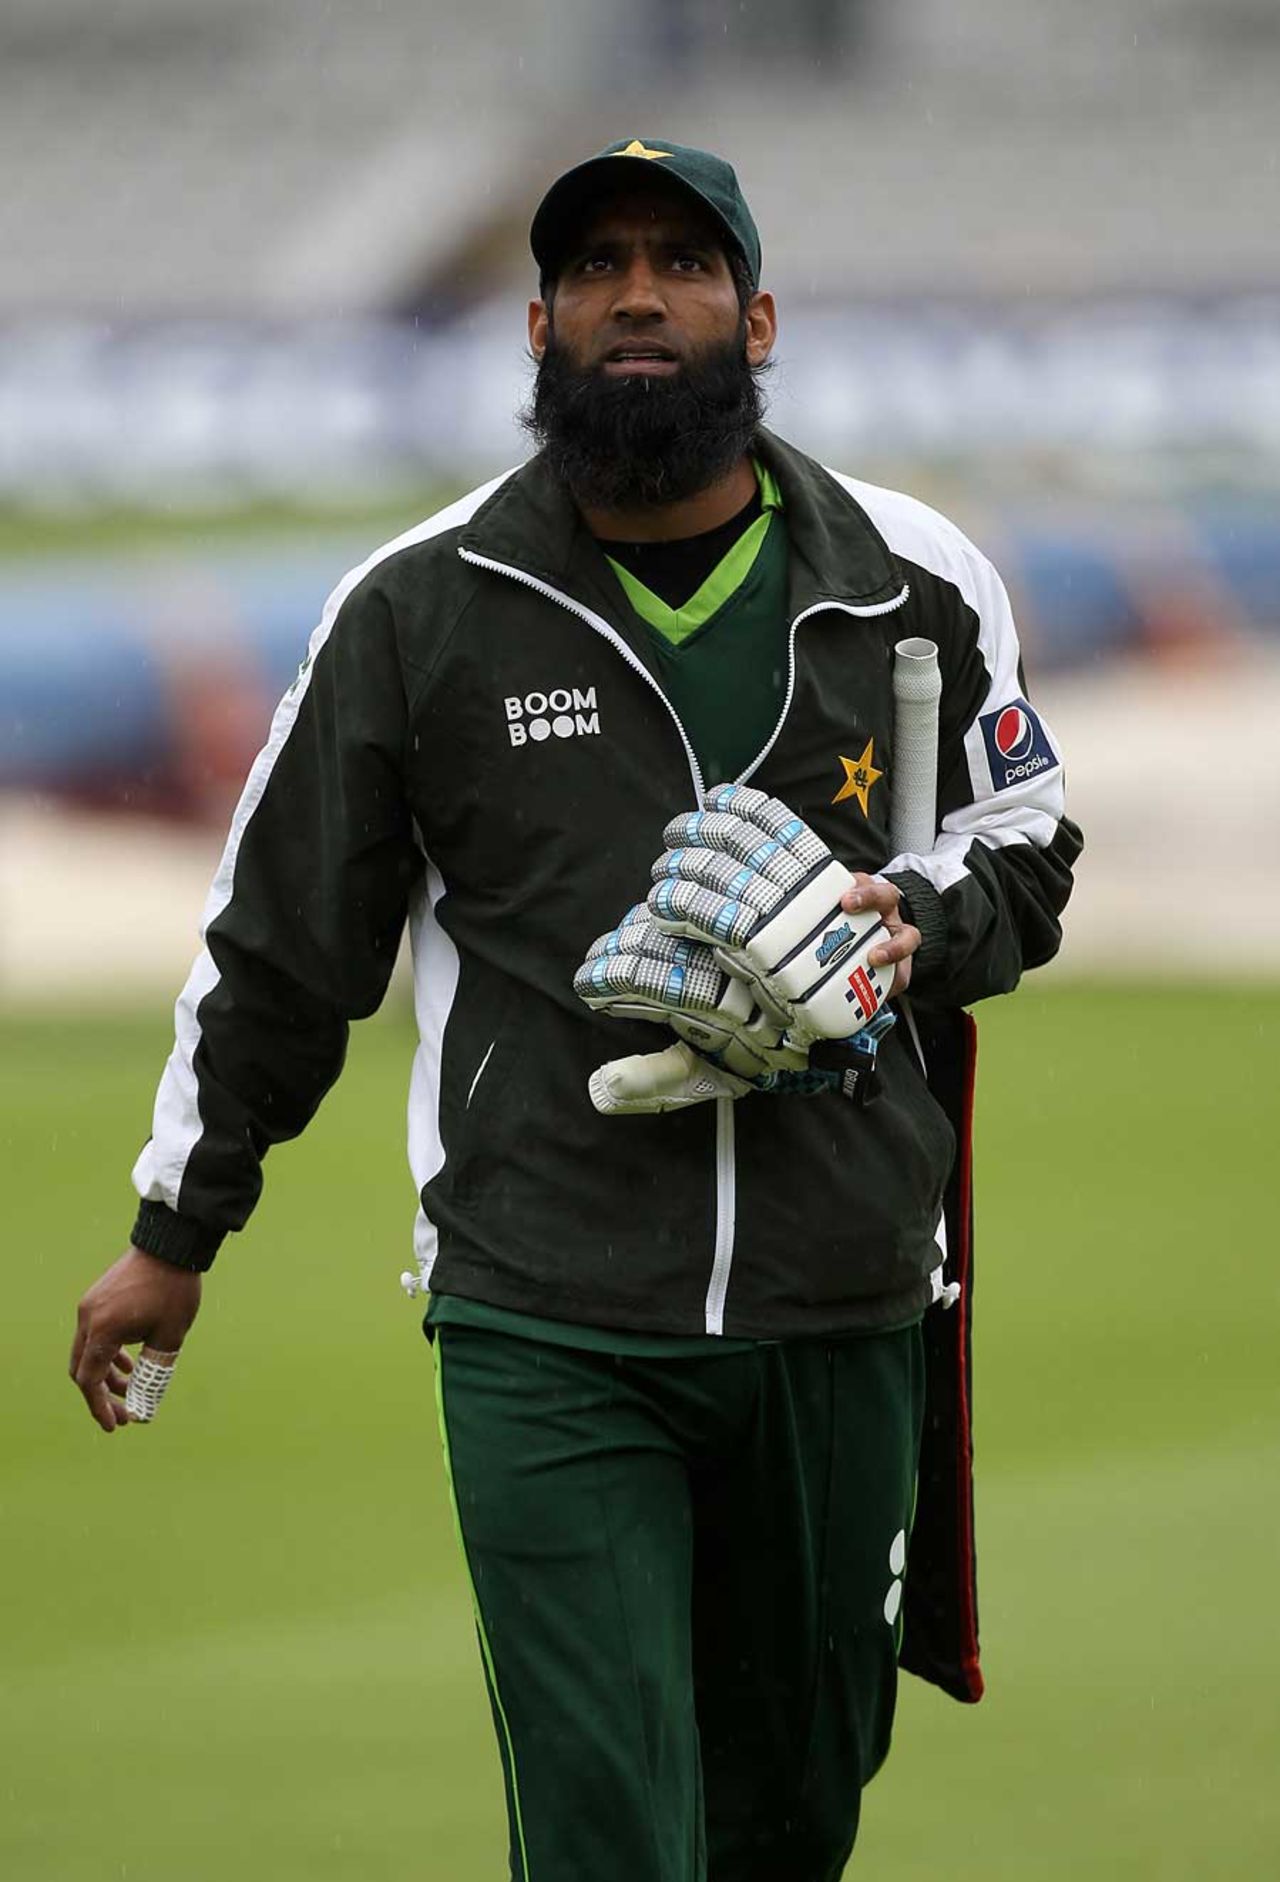 Mohammad Yousuf scored a double hundred on his previous Test appearance at Lord's, Lord's, August 25, 2010